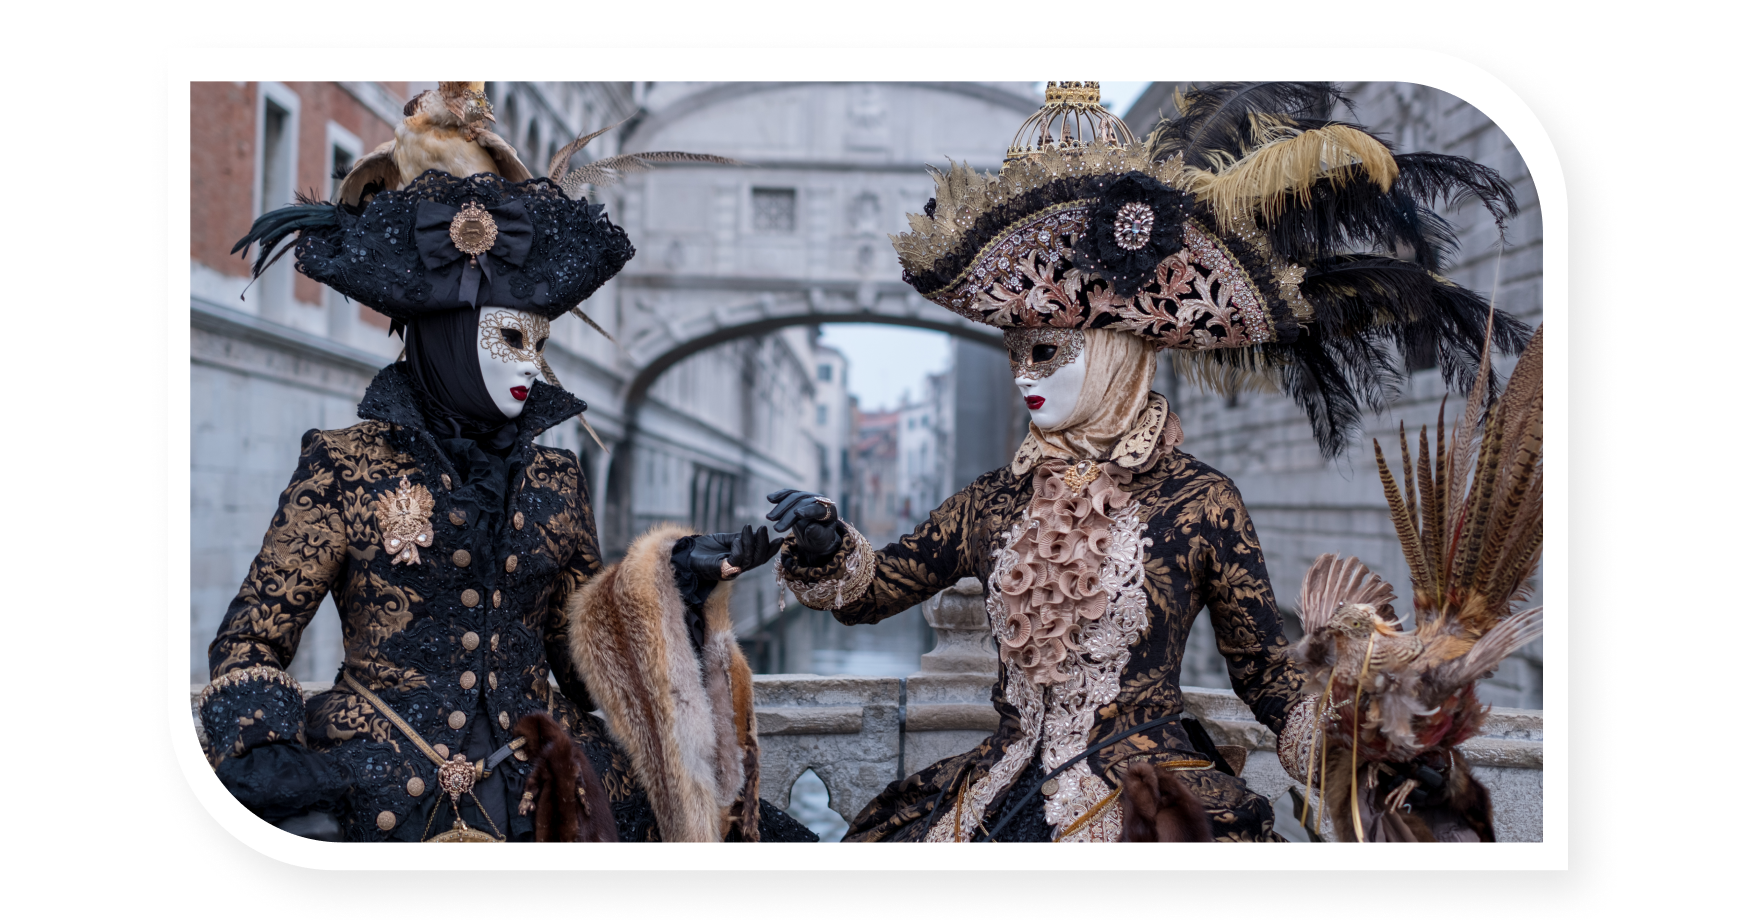 People dressed up on a gondola Venice Carnival 